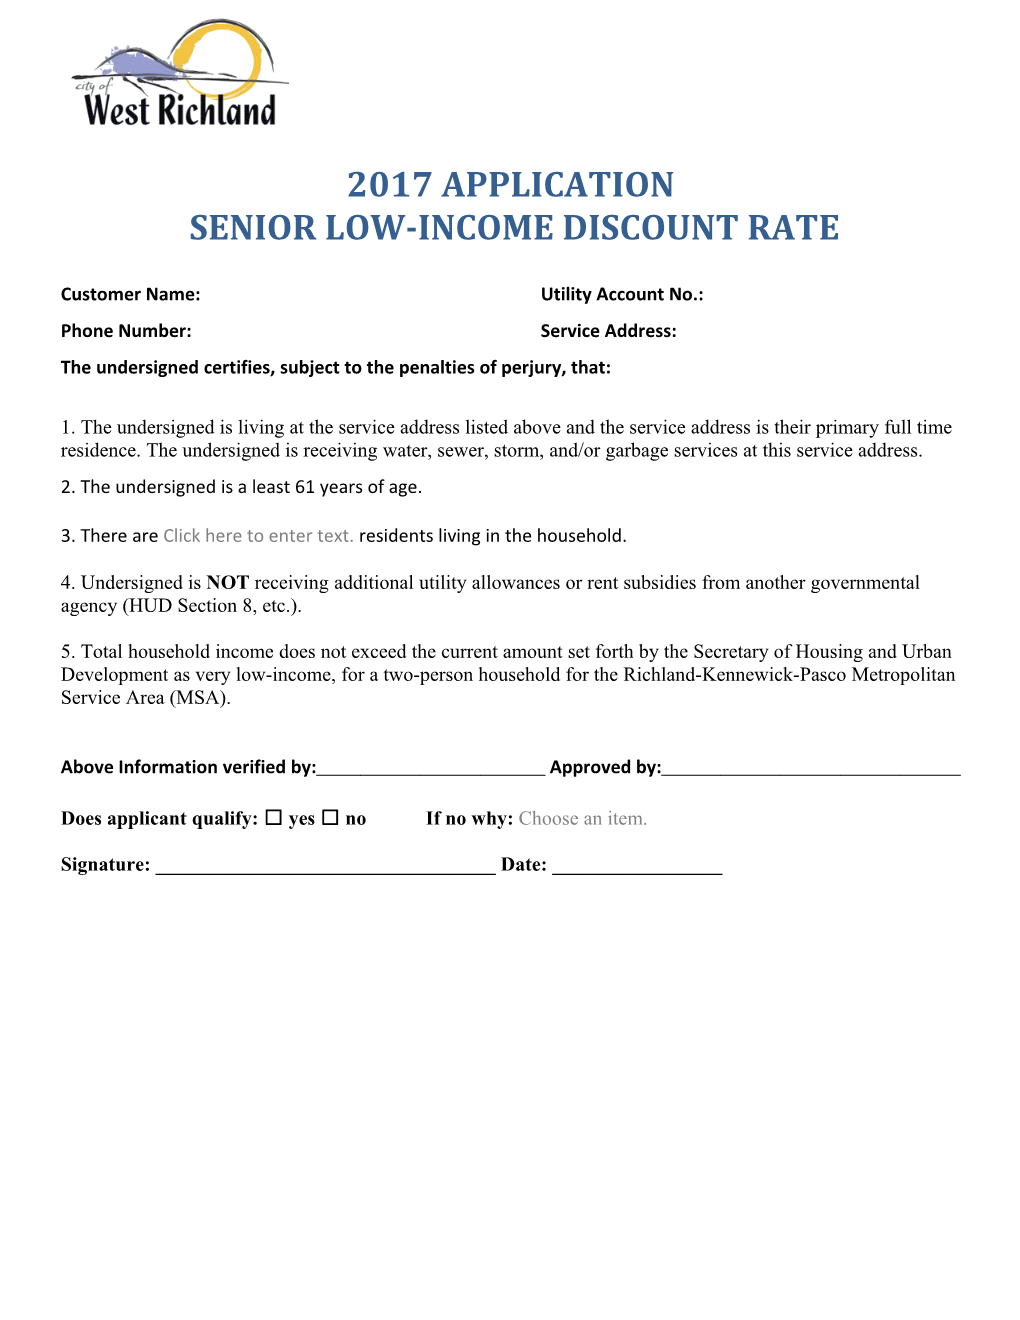 Senior Low-Income Discount Rate